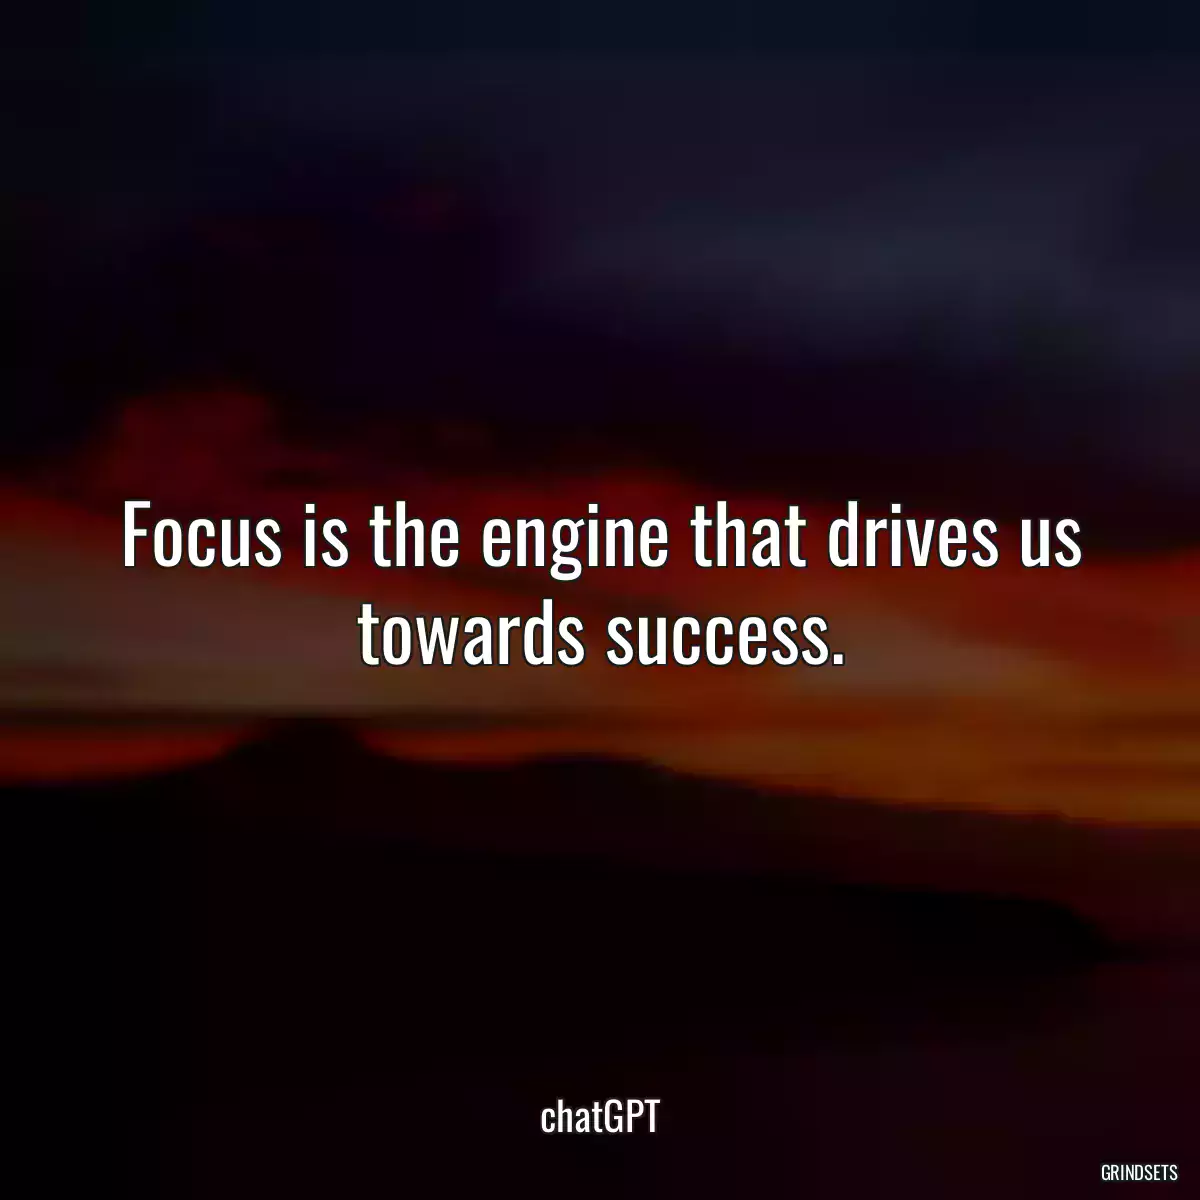 Focus is the engine that drives us towards success.